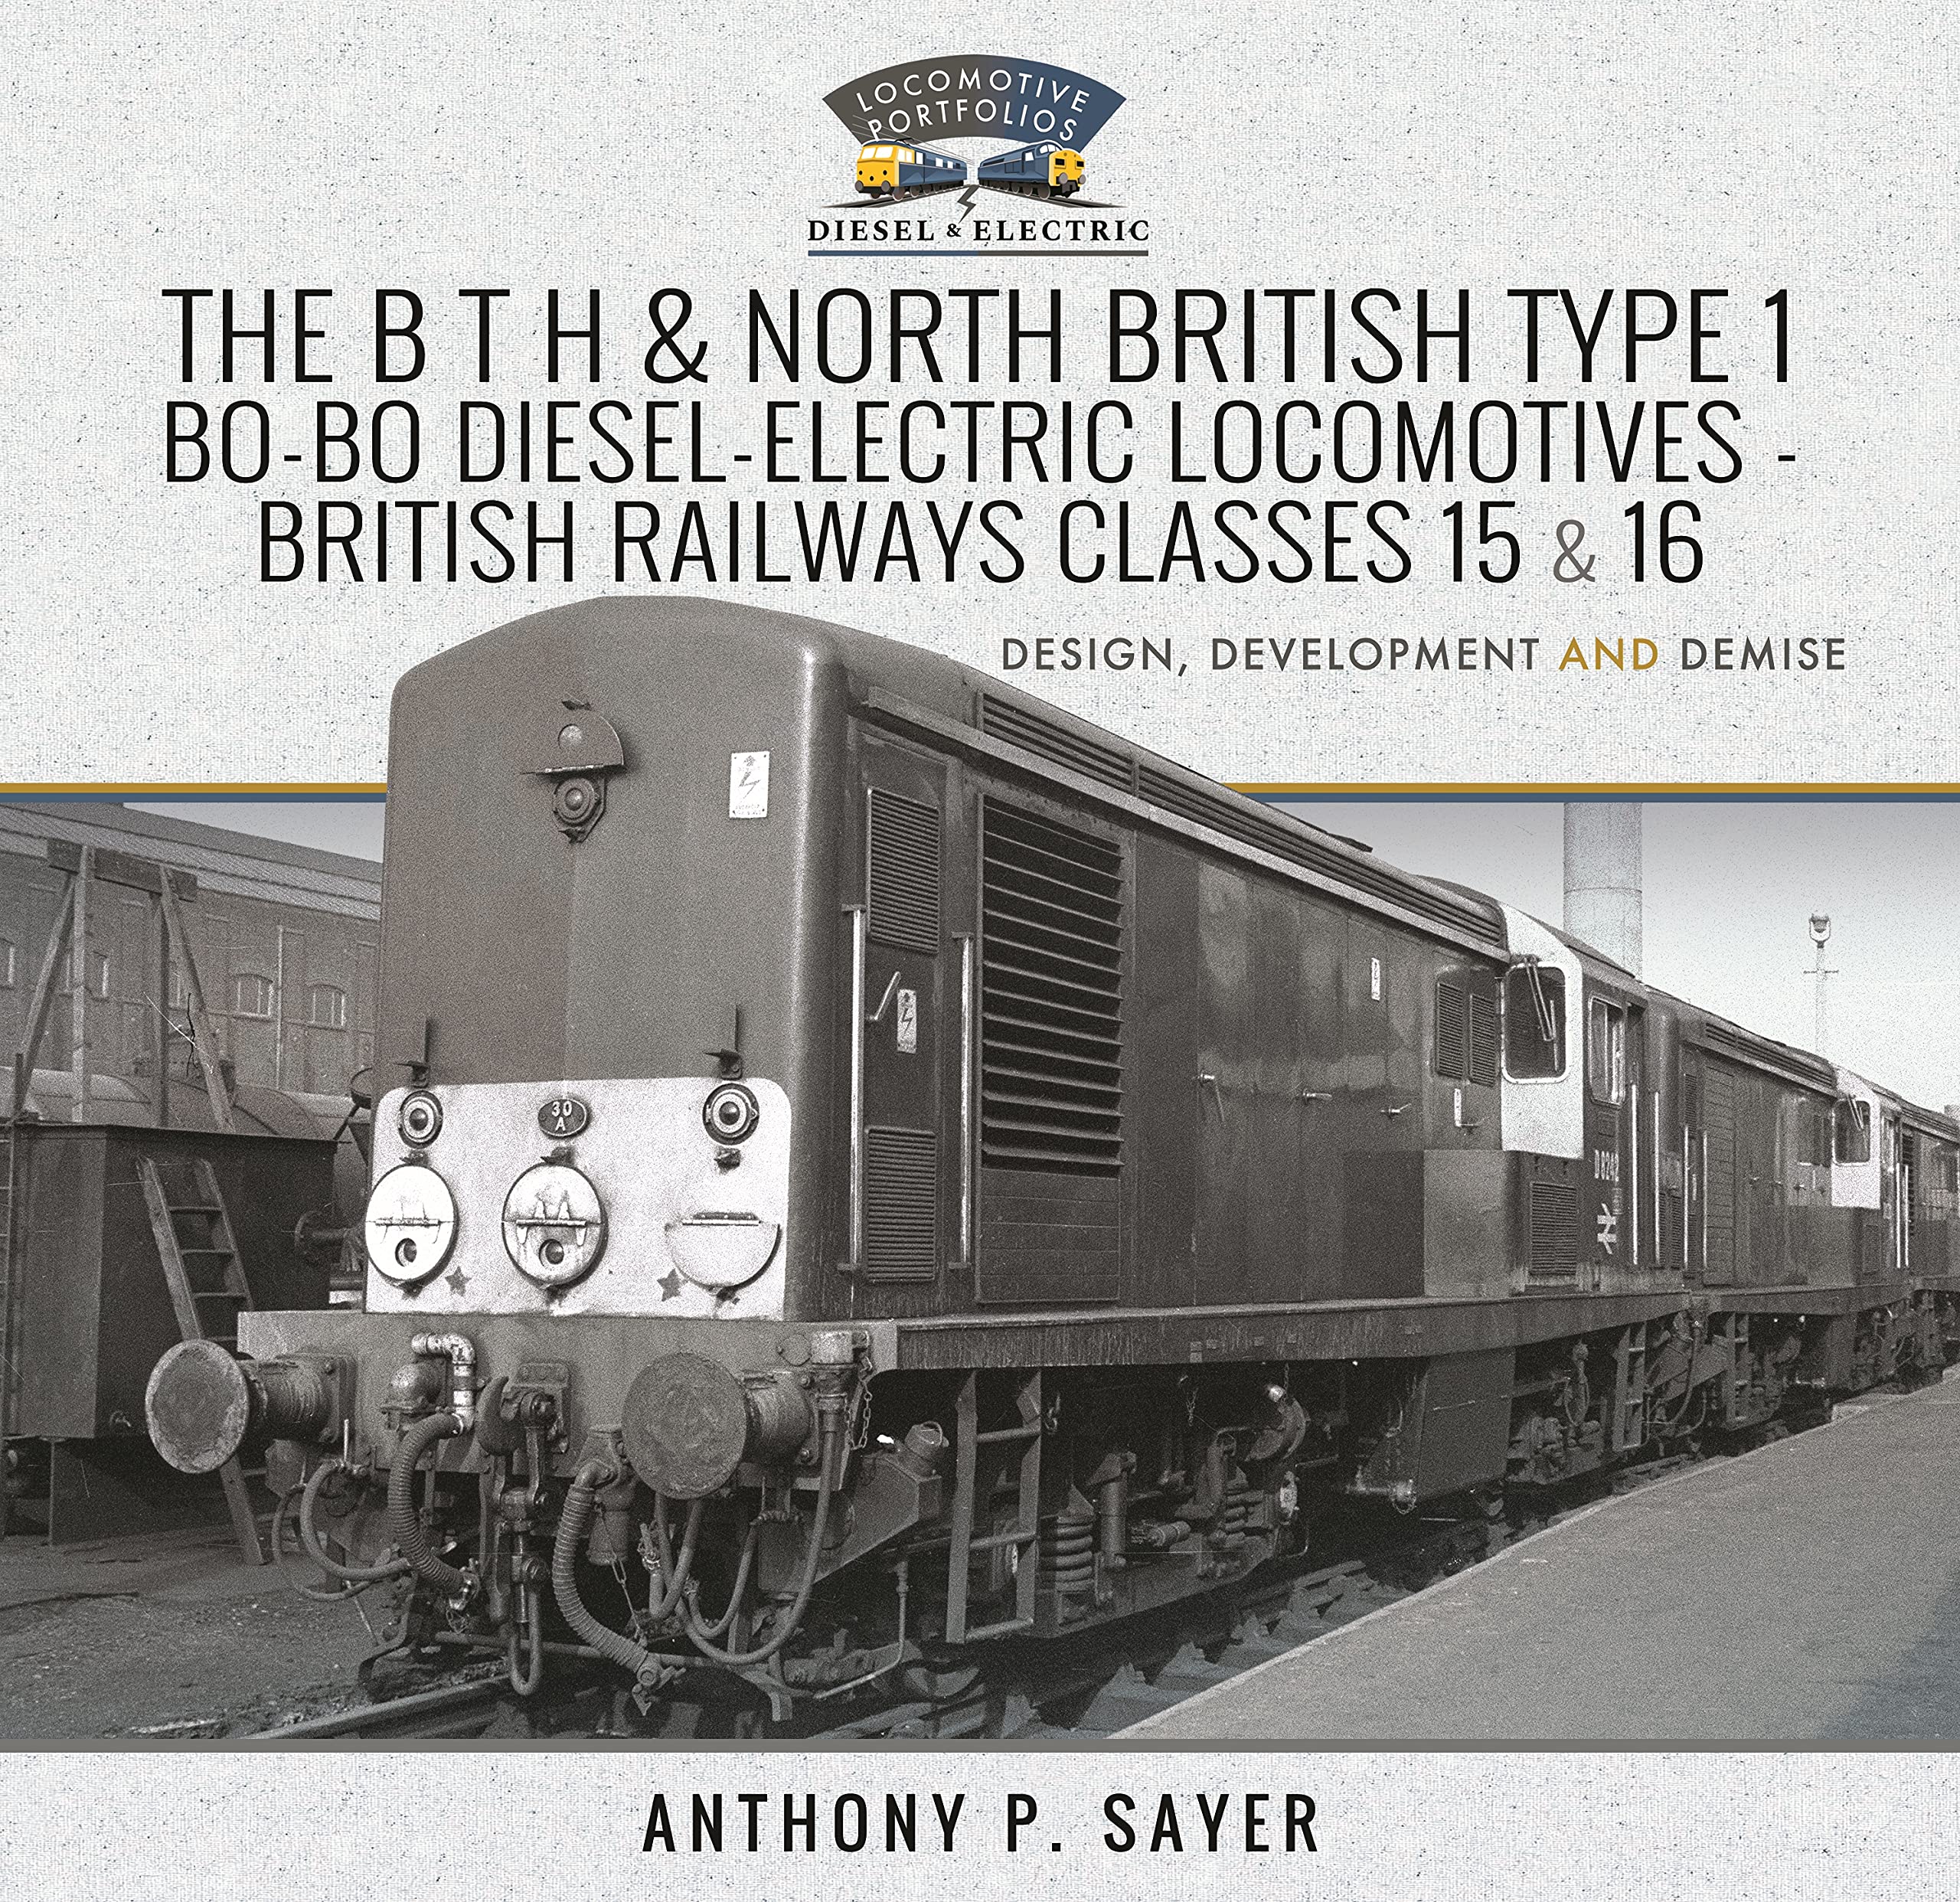 The B T H and North British Type 1 Bo-Bo Diesel-Electric Locomotives - British Railways Classes 15 and 16